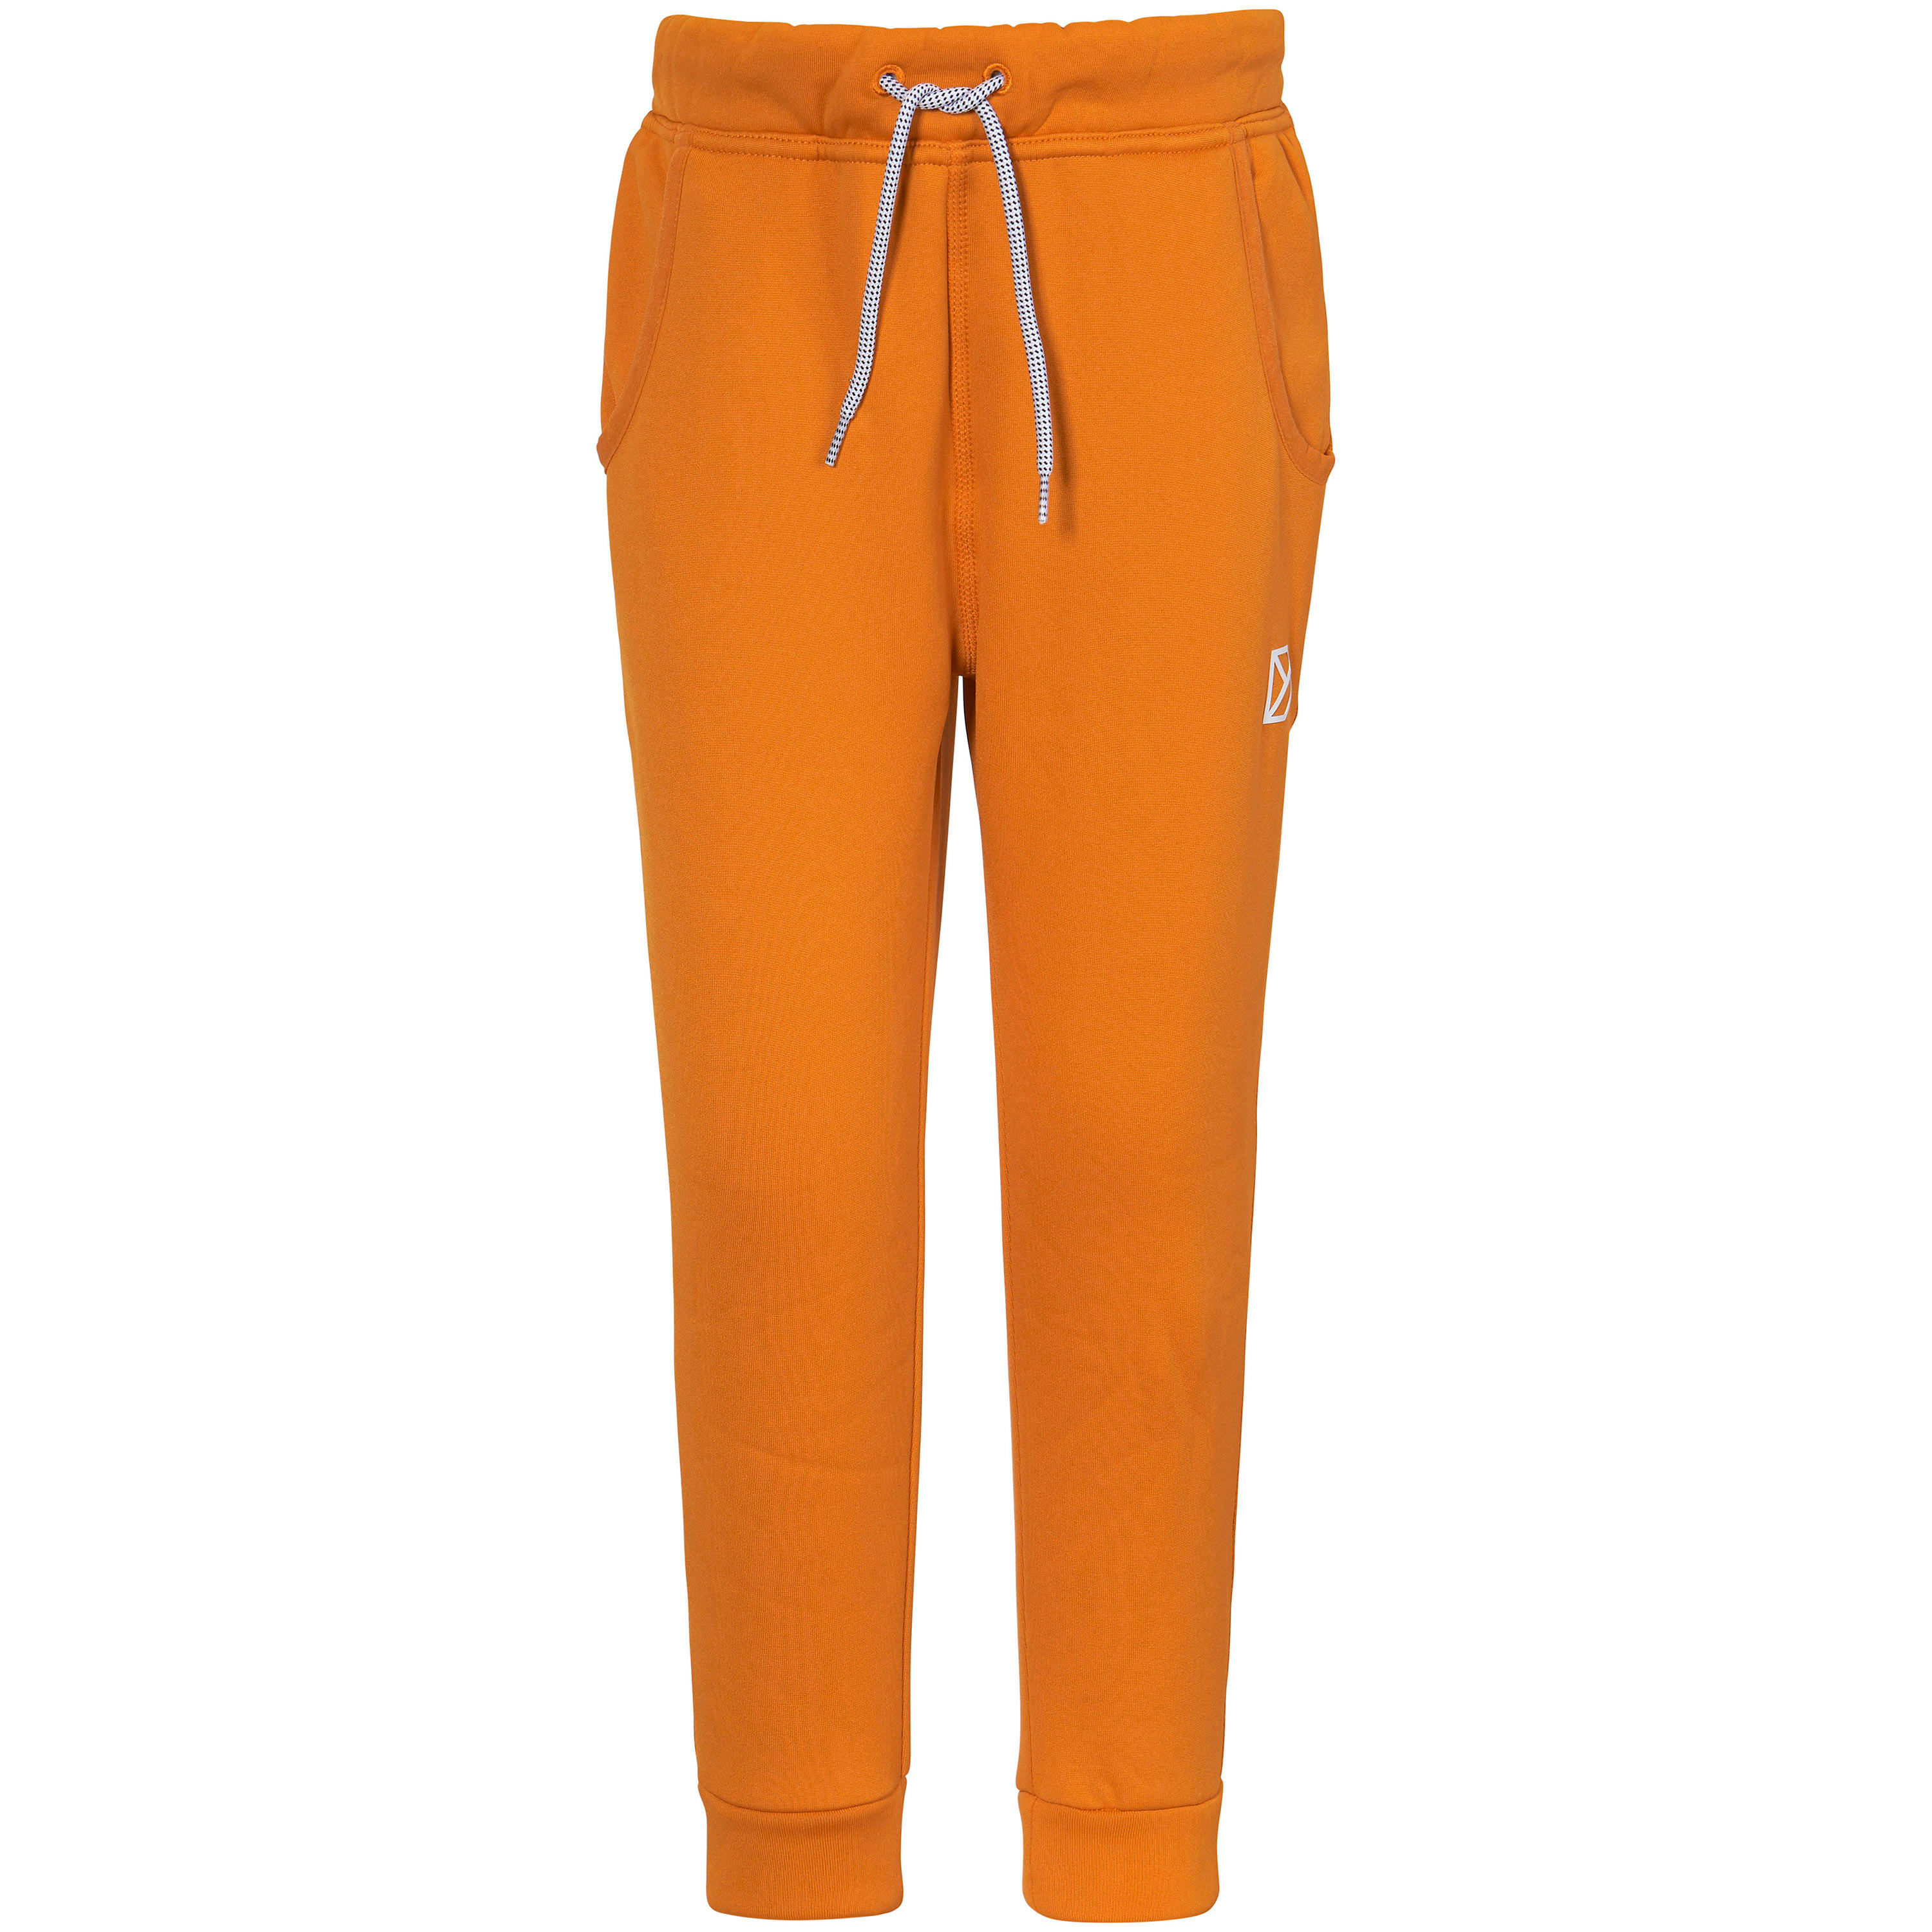 Buy Didriksons Corin Kids Pant 4 from Outnorth